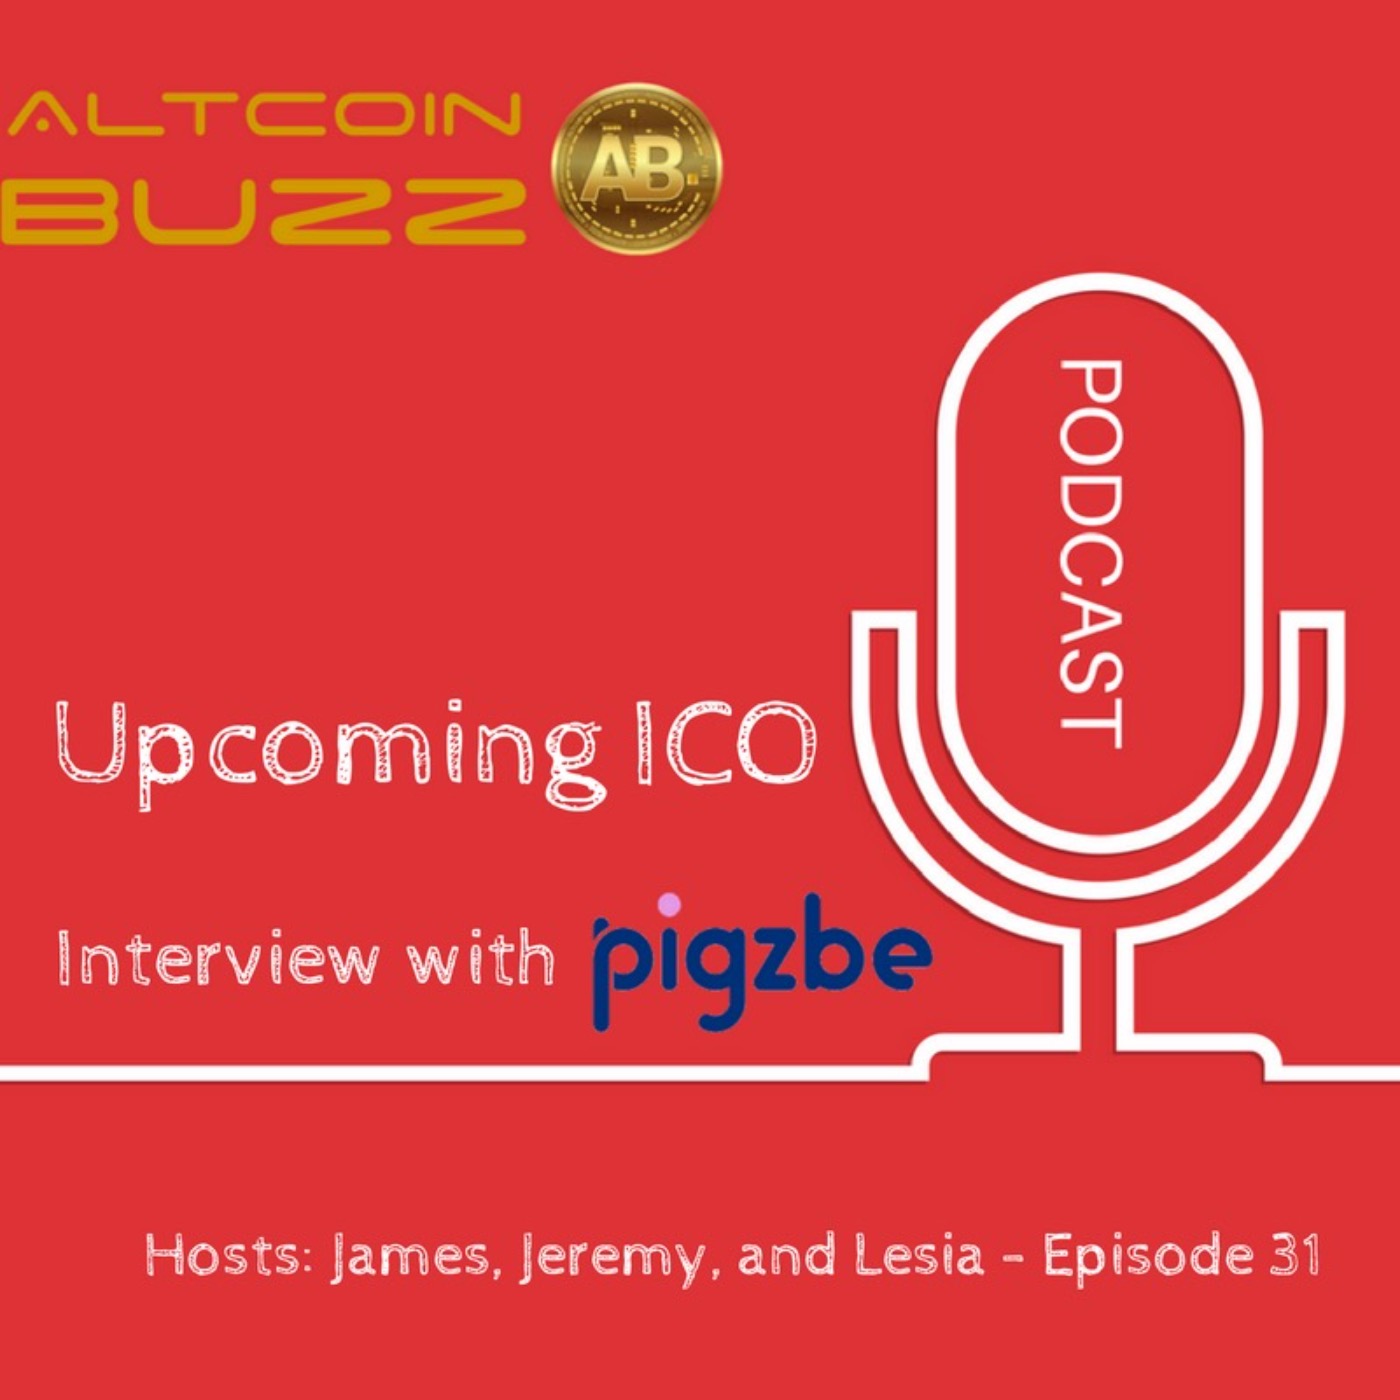 Interview with upcoming ICO Pigzbe - EP. 31